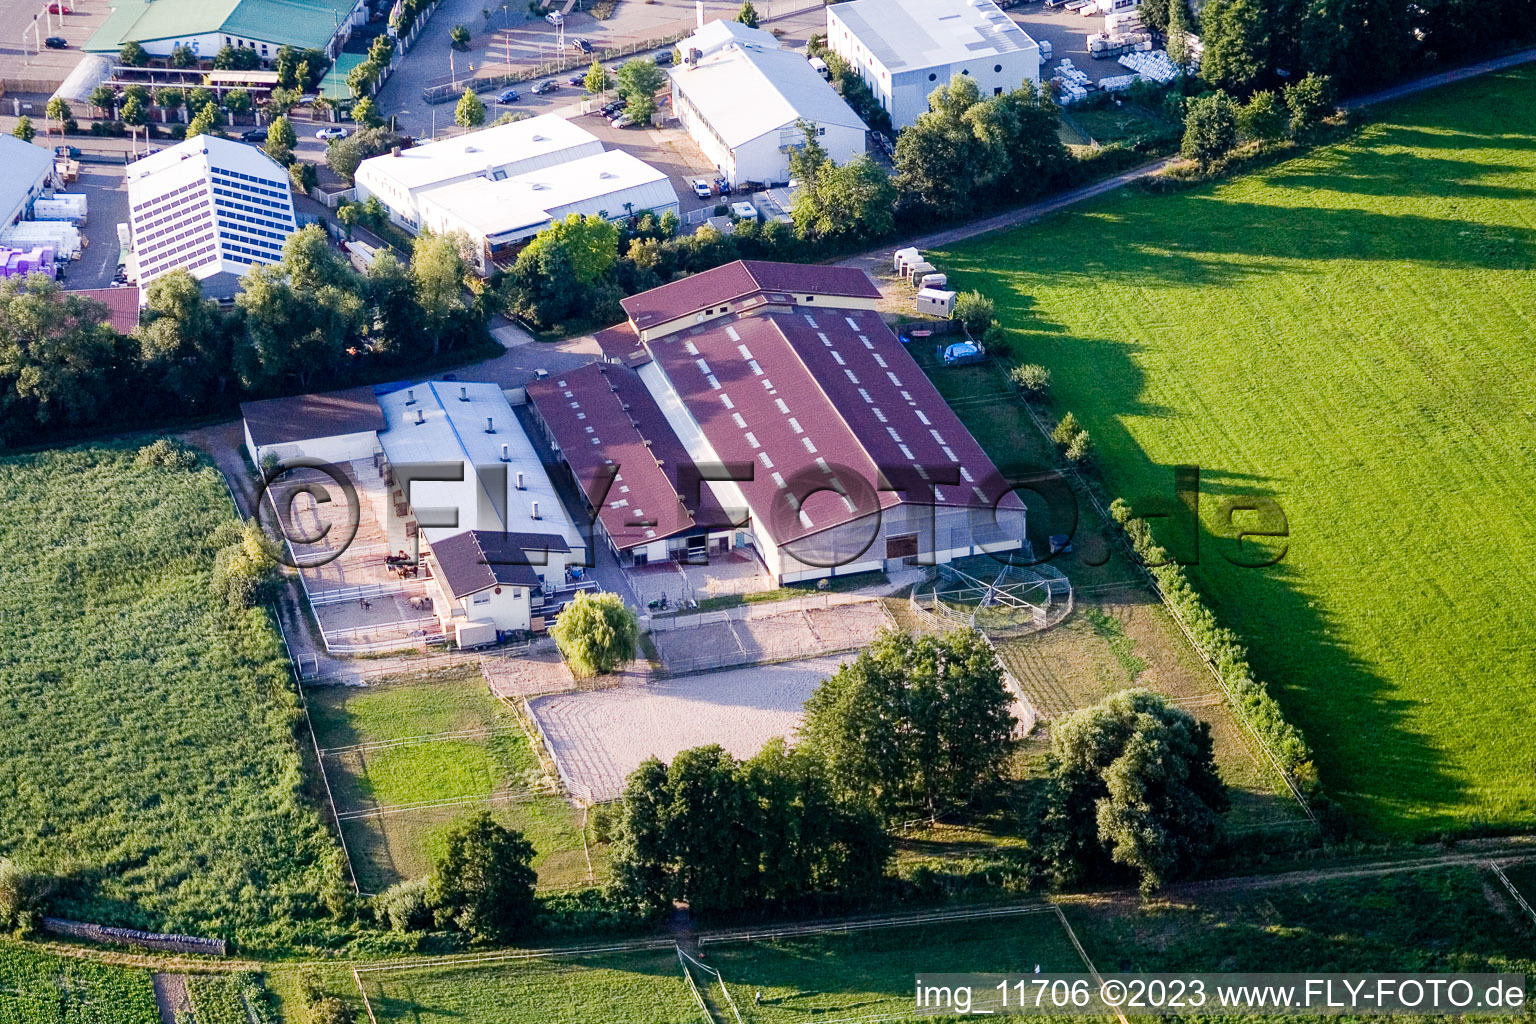 Aerial view of Horse farm in the district Minderslachen in Kandel in the state Rhineland-Palatinate, Germany